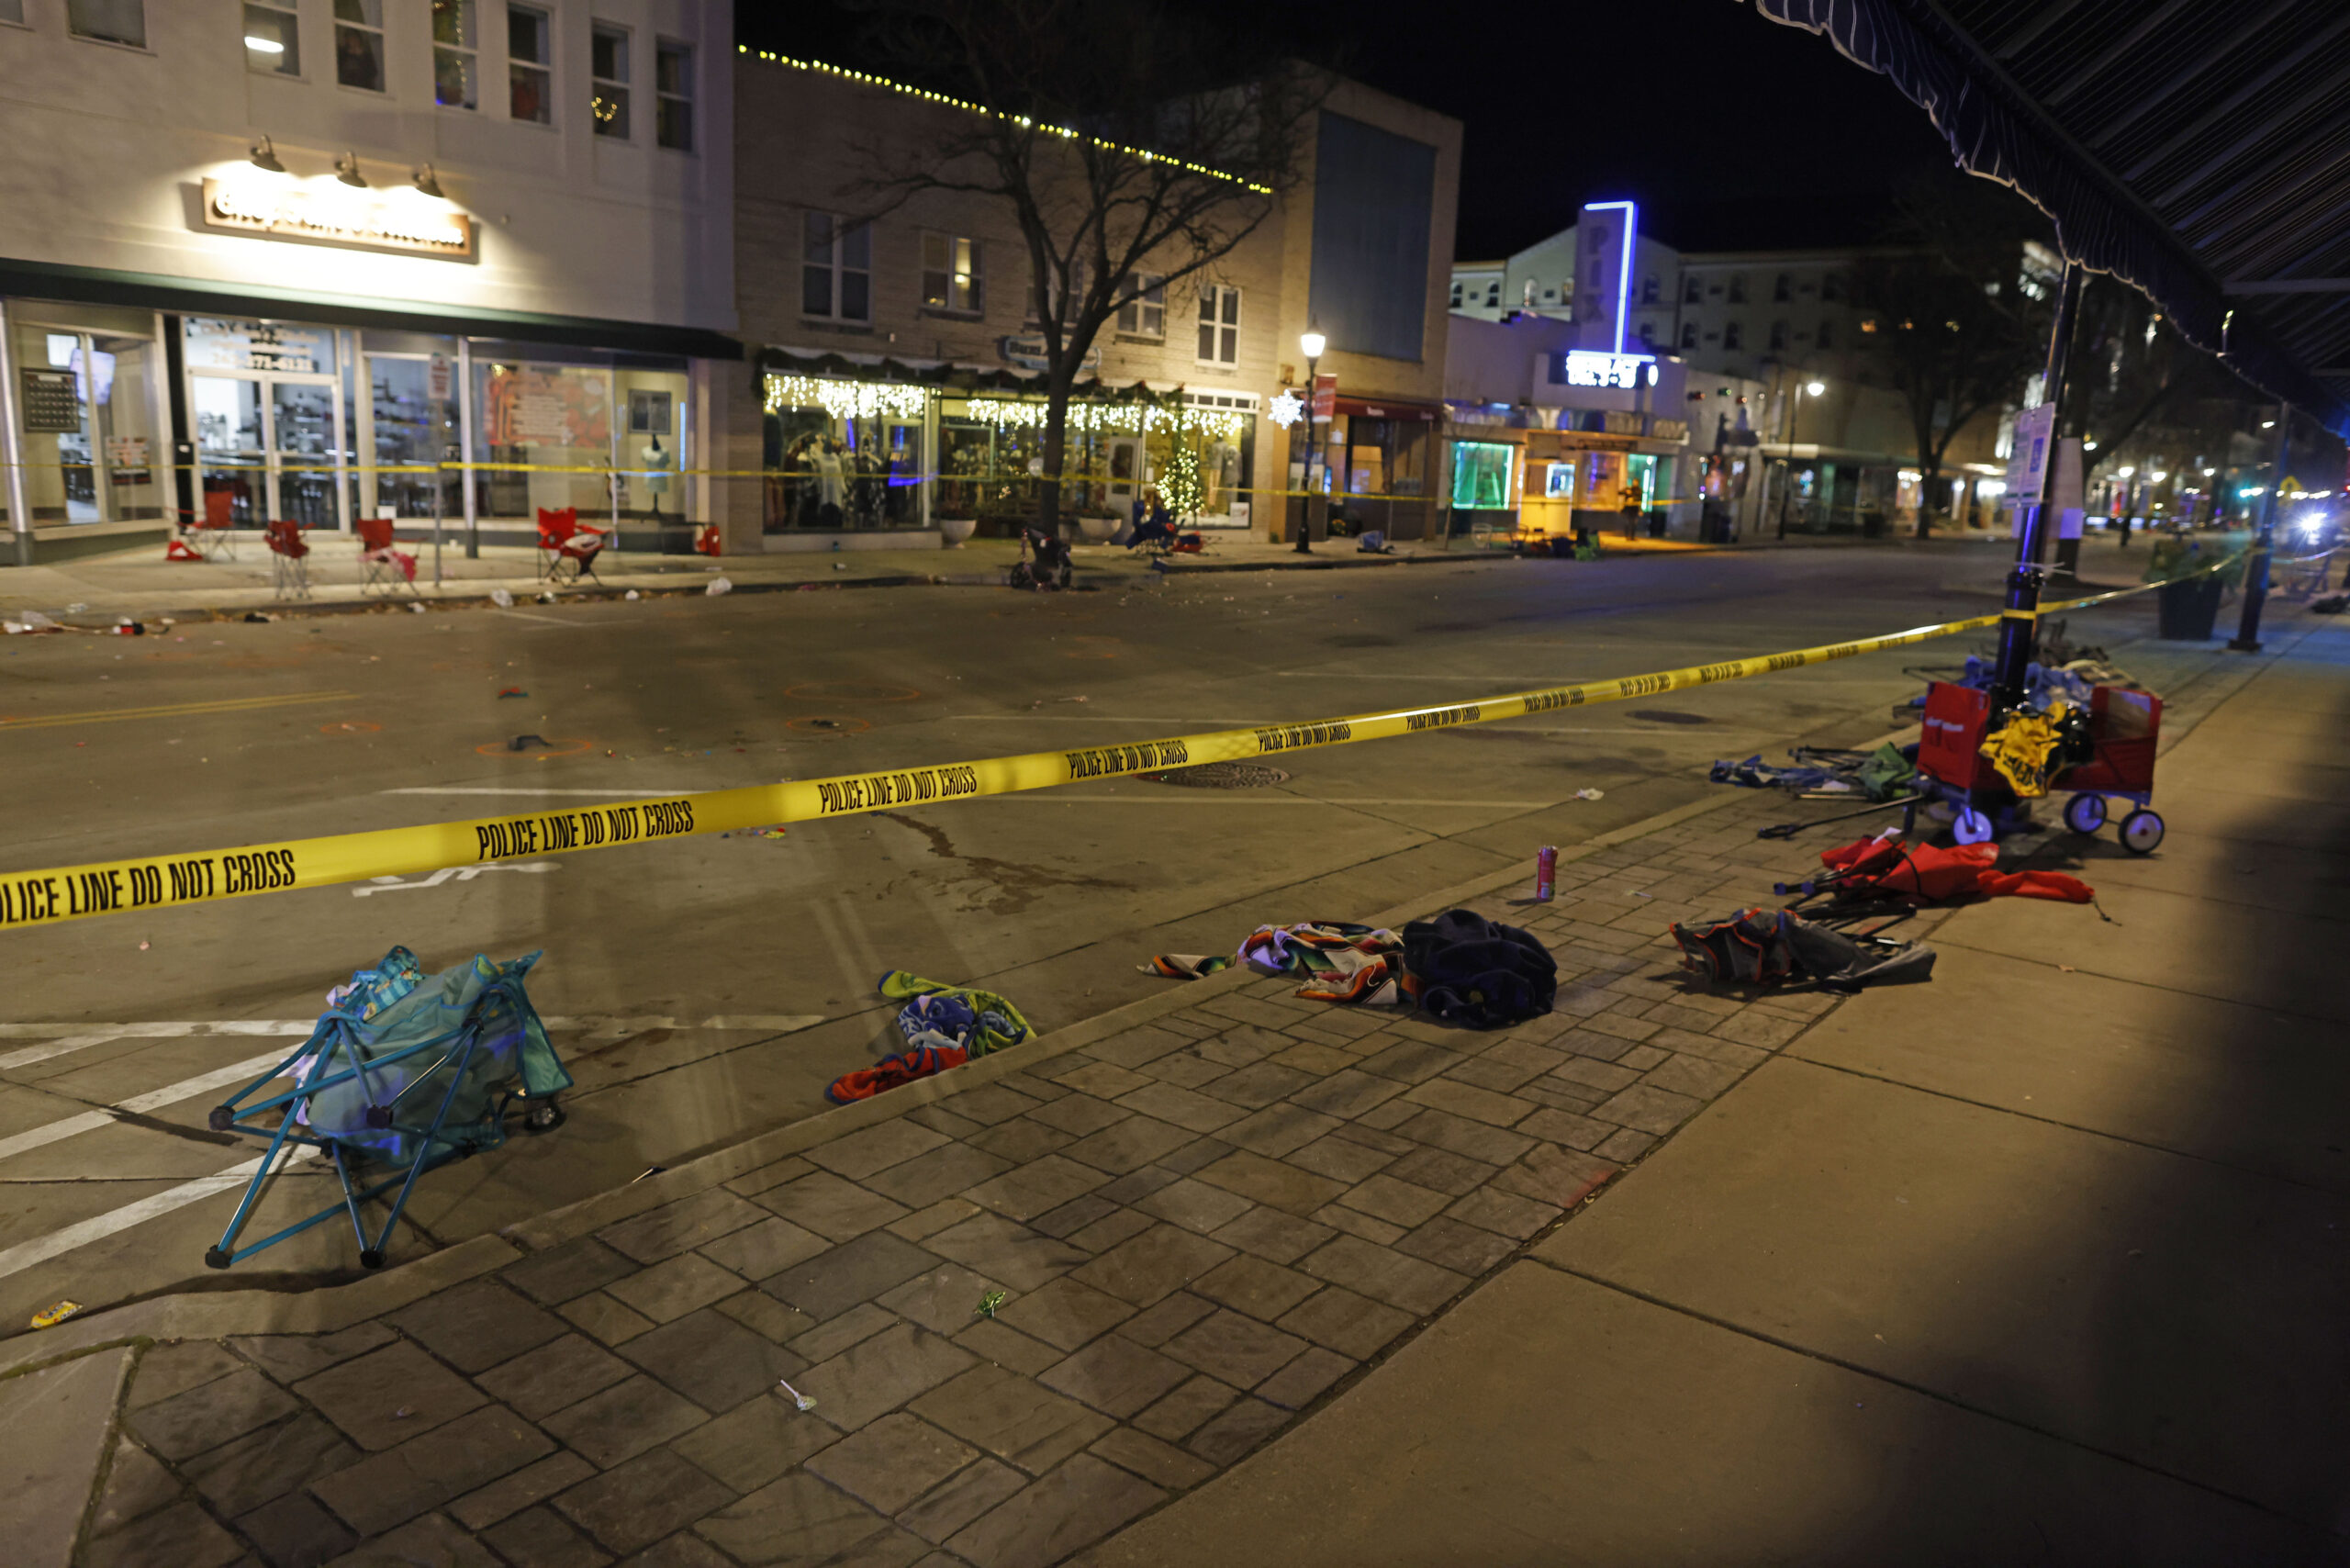 Police tape cordons off a street in Waukesha after an SUV plowed into a Christmas parade